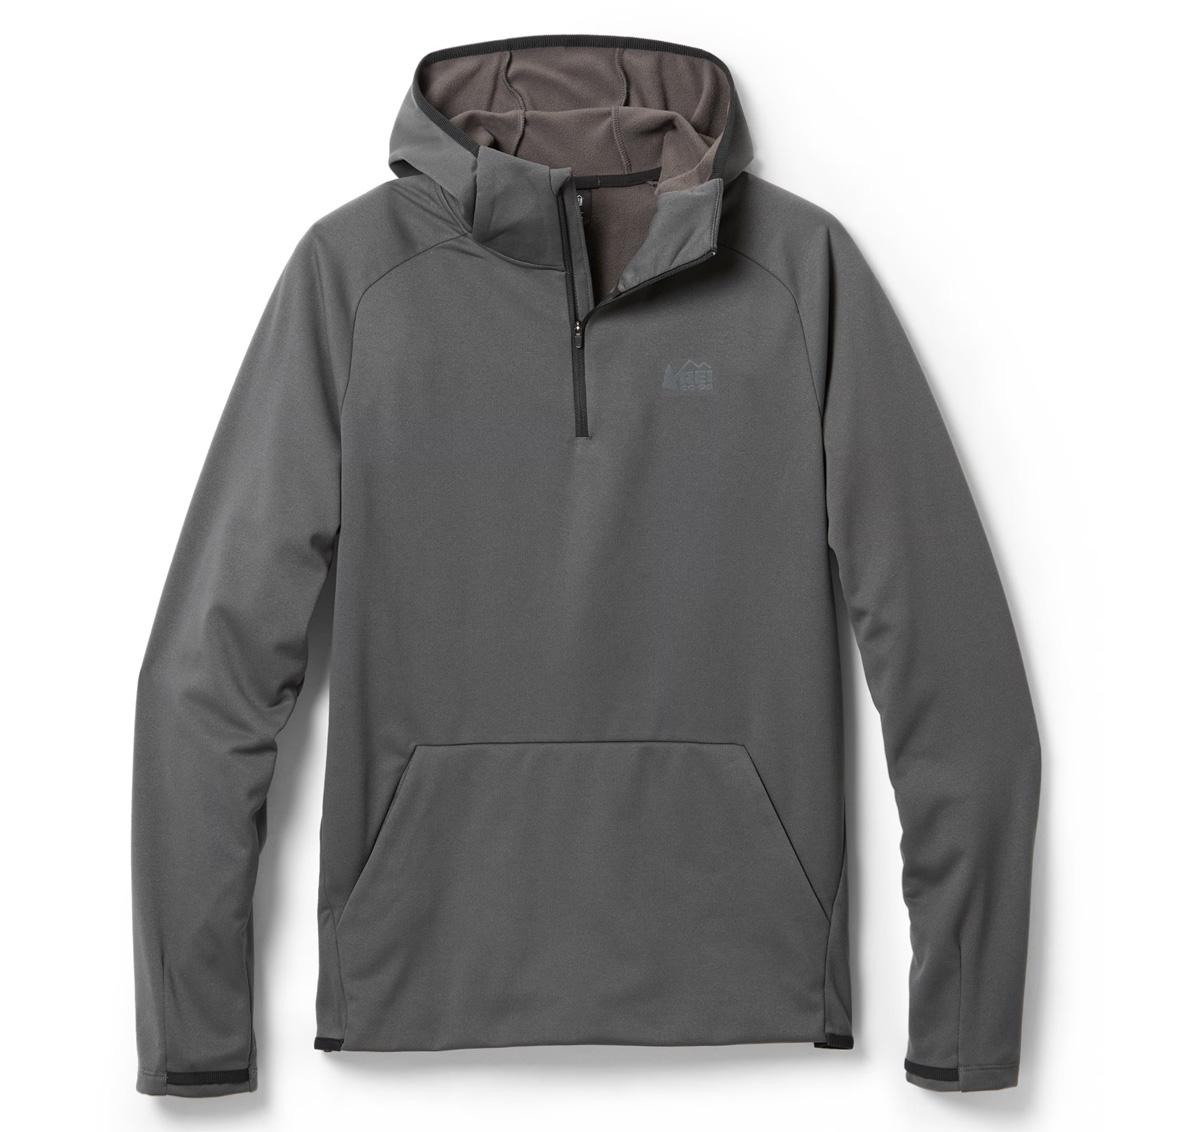 REI Co-op Active Pursuits Mens Tech Hoodie Sweater for $23.83